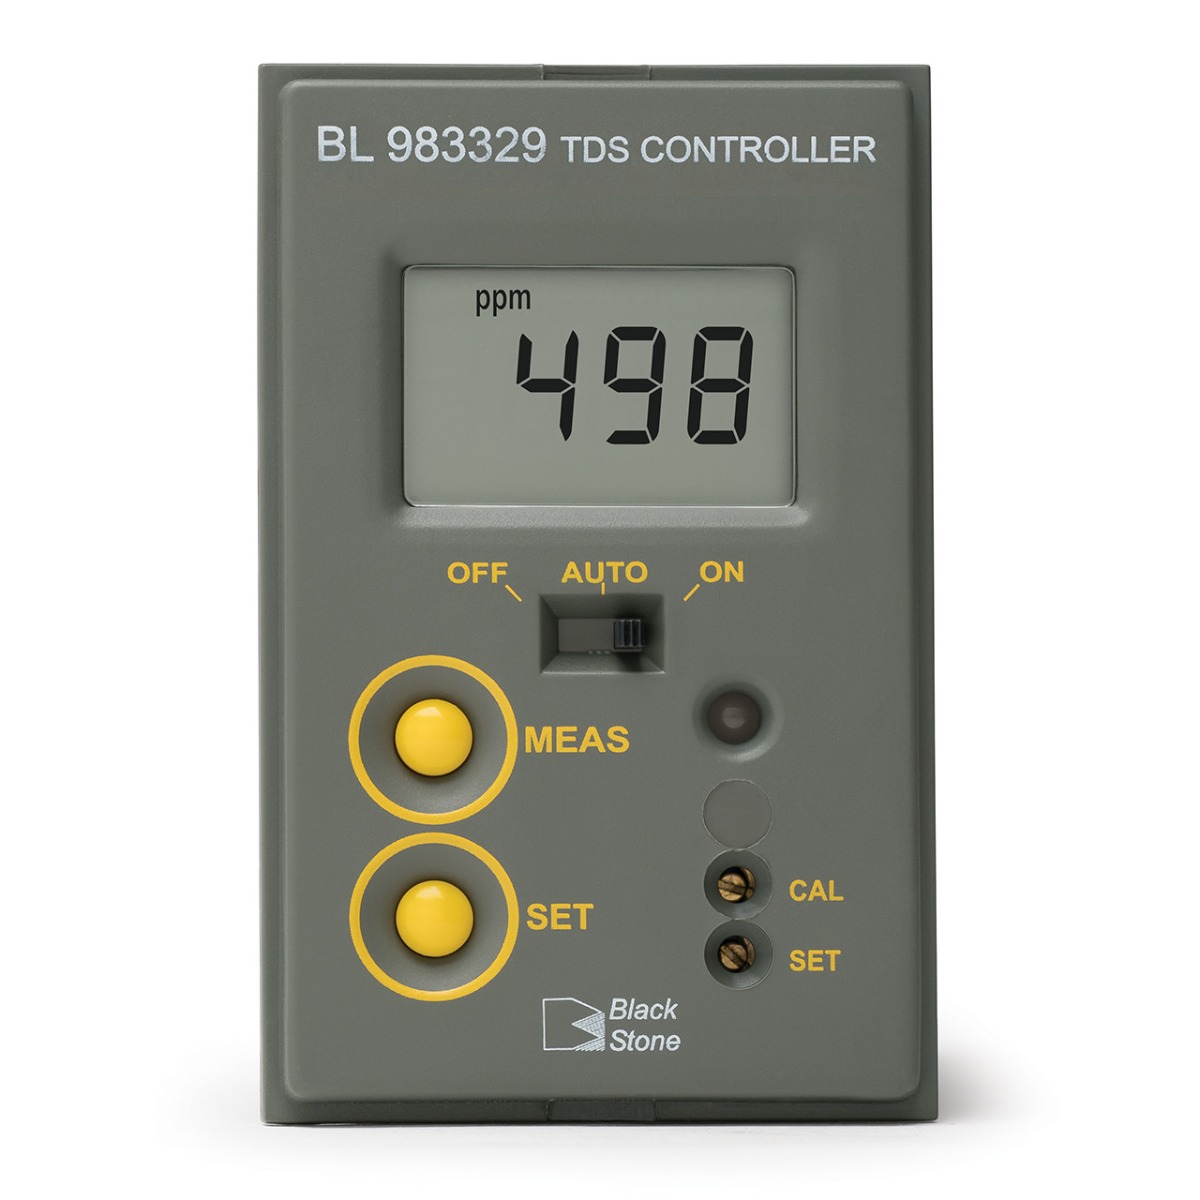 TDS Mini Controller (0 to 999 ppm) - BL983329